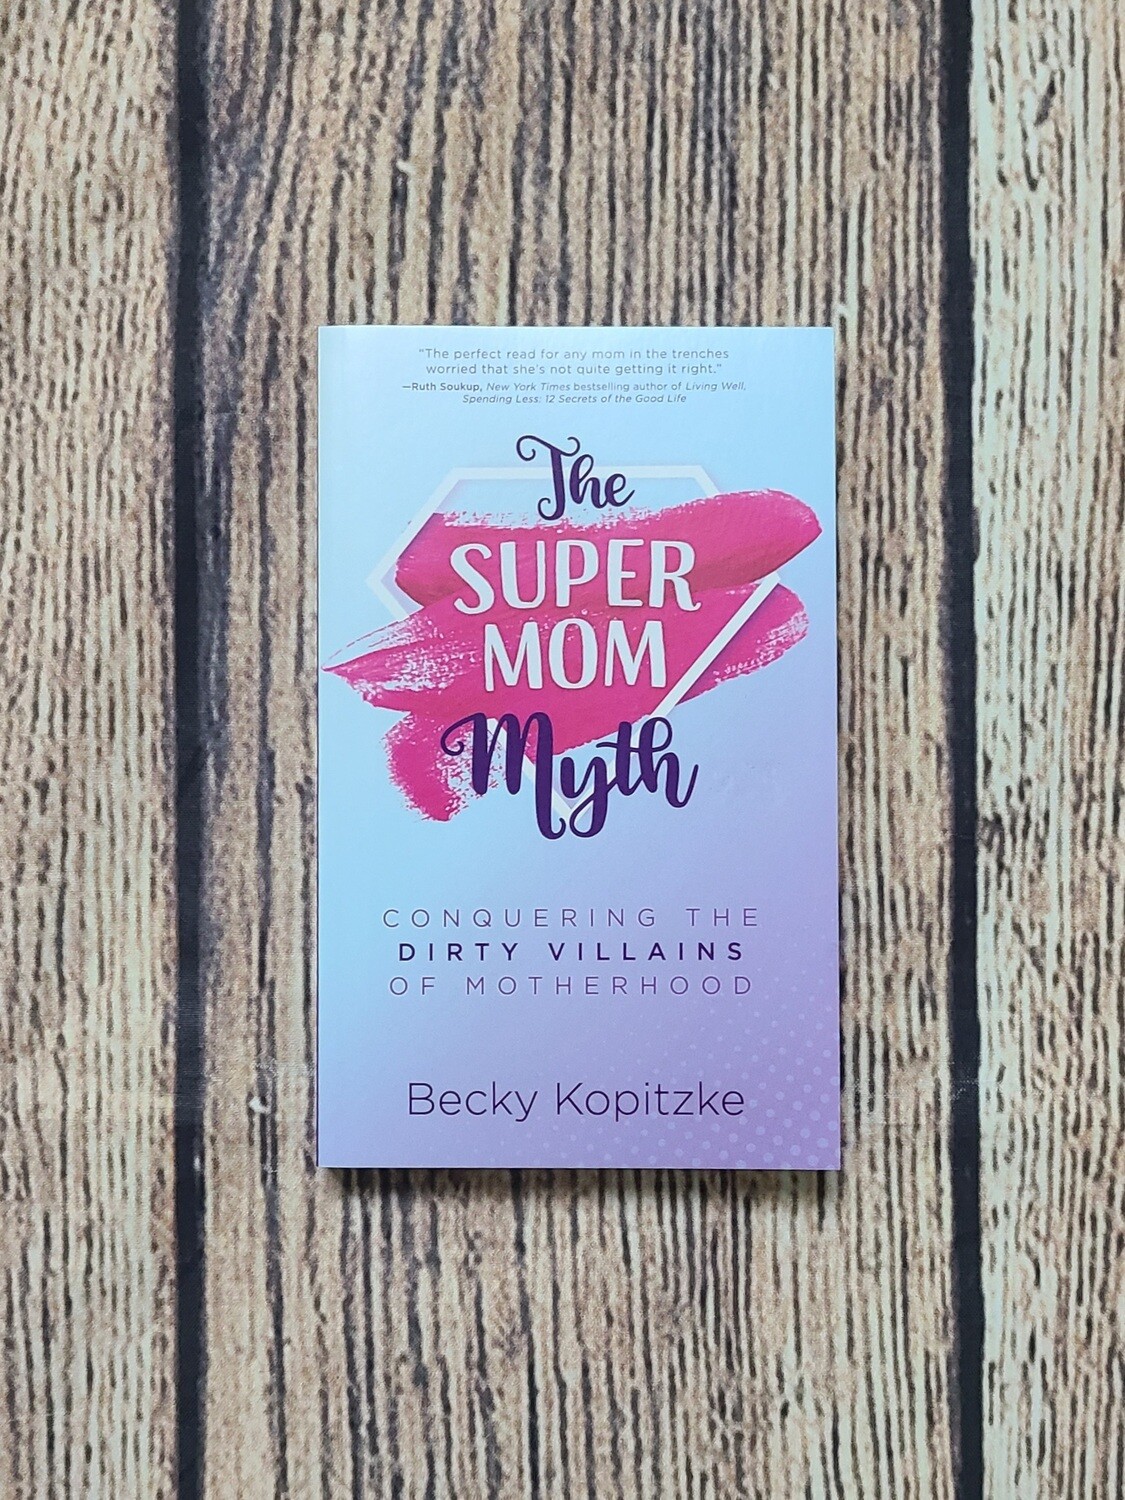 The Supermom Myth: Conquering the Dirty Villains of Motherhood by Becky Kopitzke